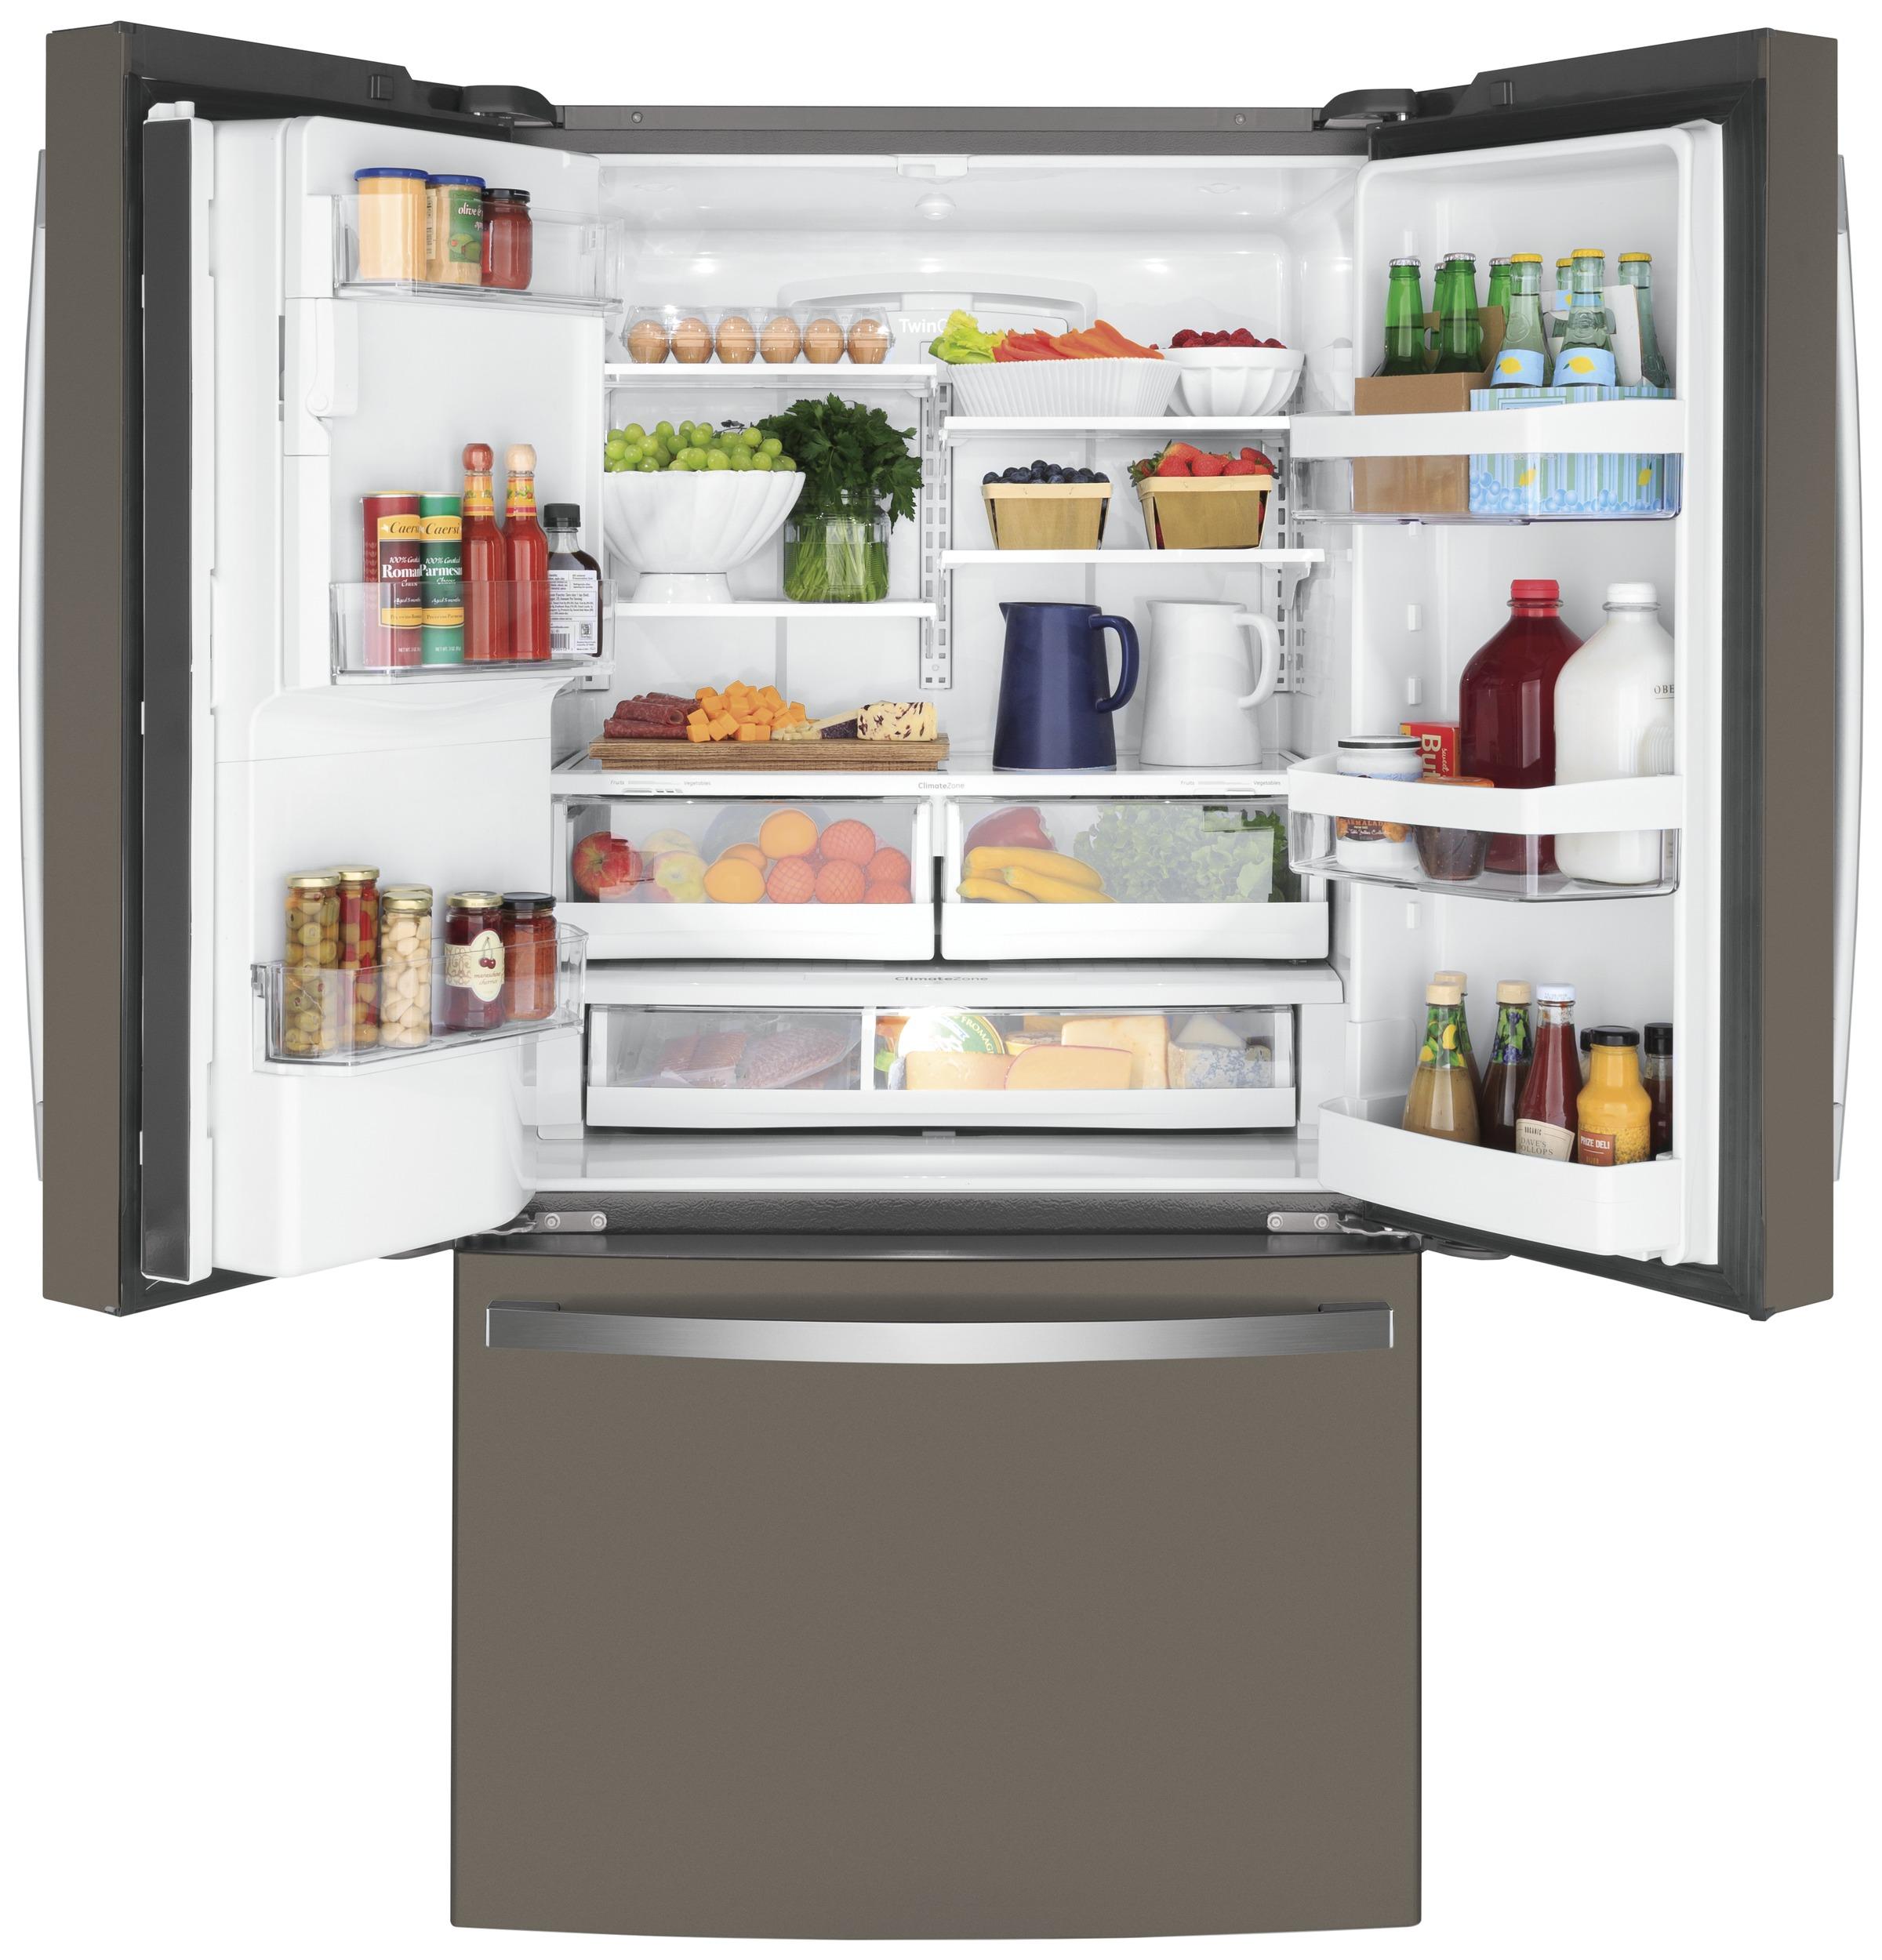 GE Profile - PYE22KBLTS - GE Profile™ Series ENERGY STAR® 22.1 Cu. Ft.  Counter-Depth French-Door Refrigerator with Hands-Free AutoFill-PYE22KBLTS